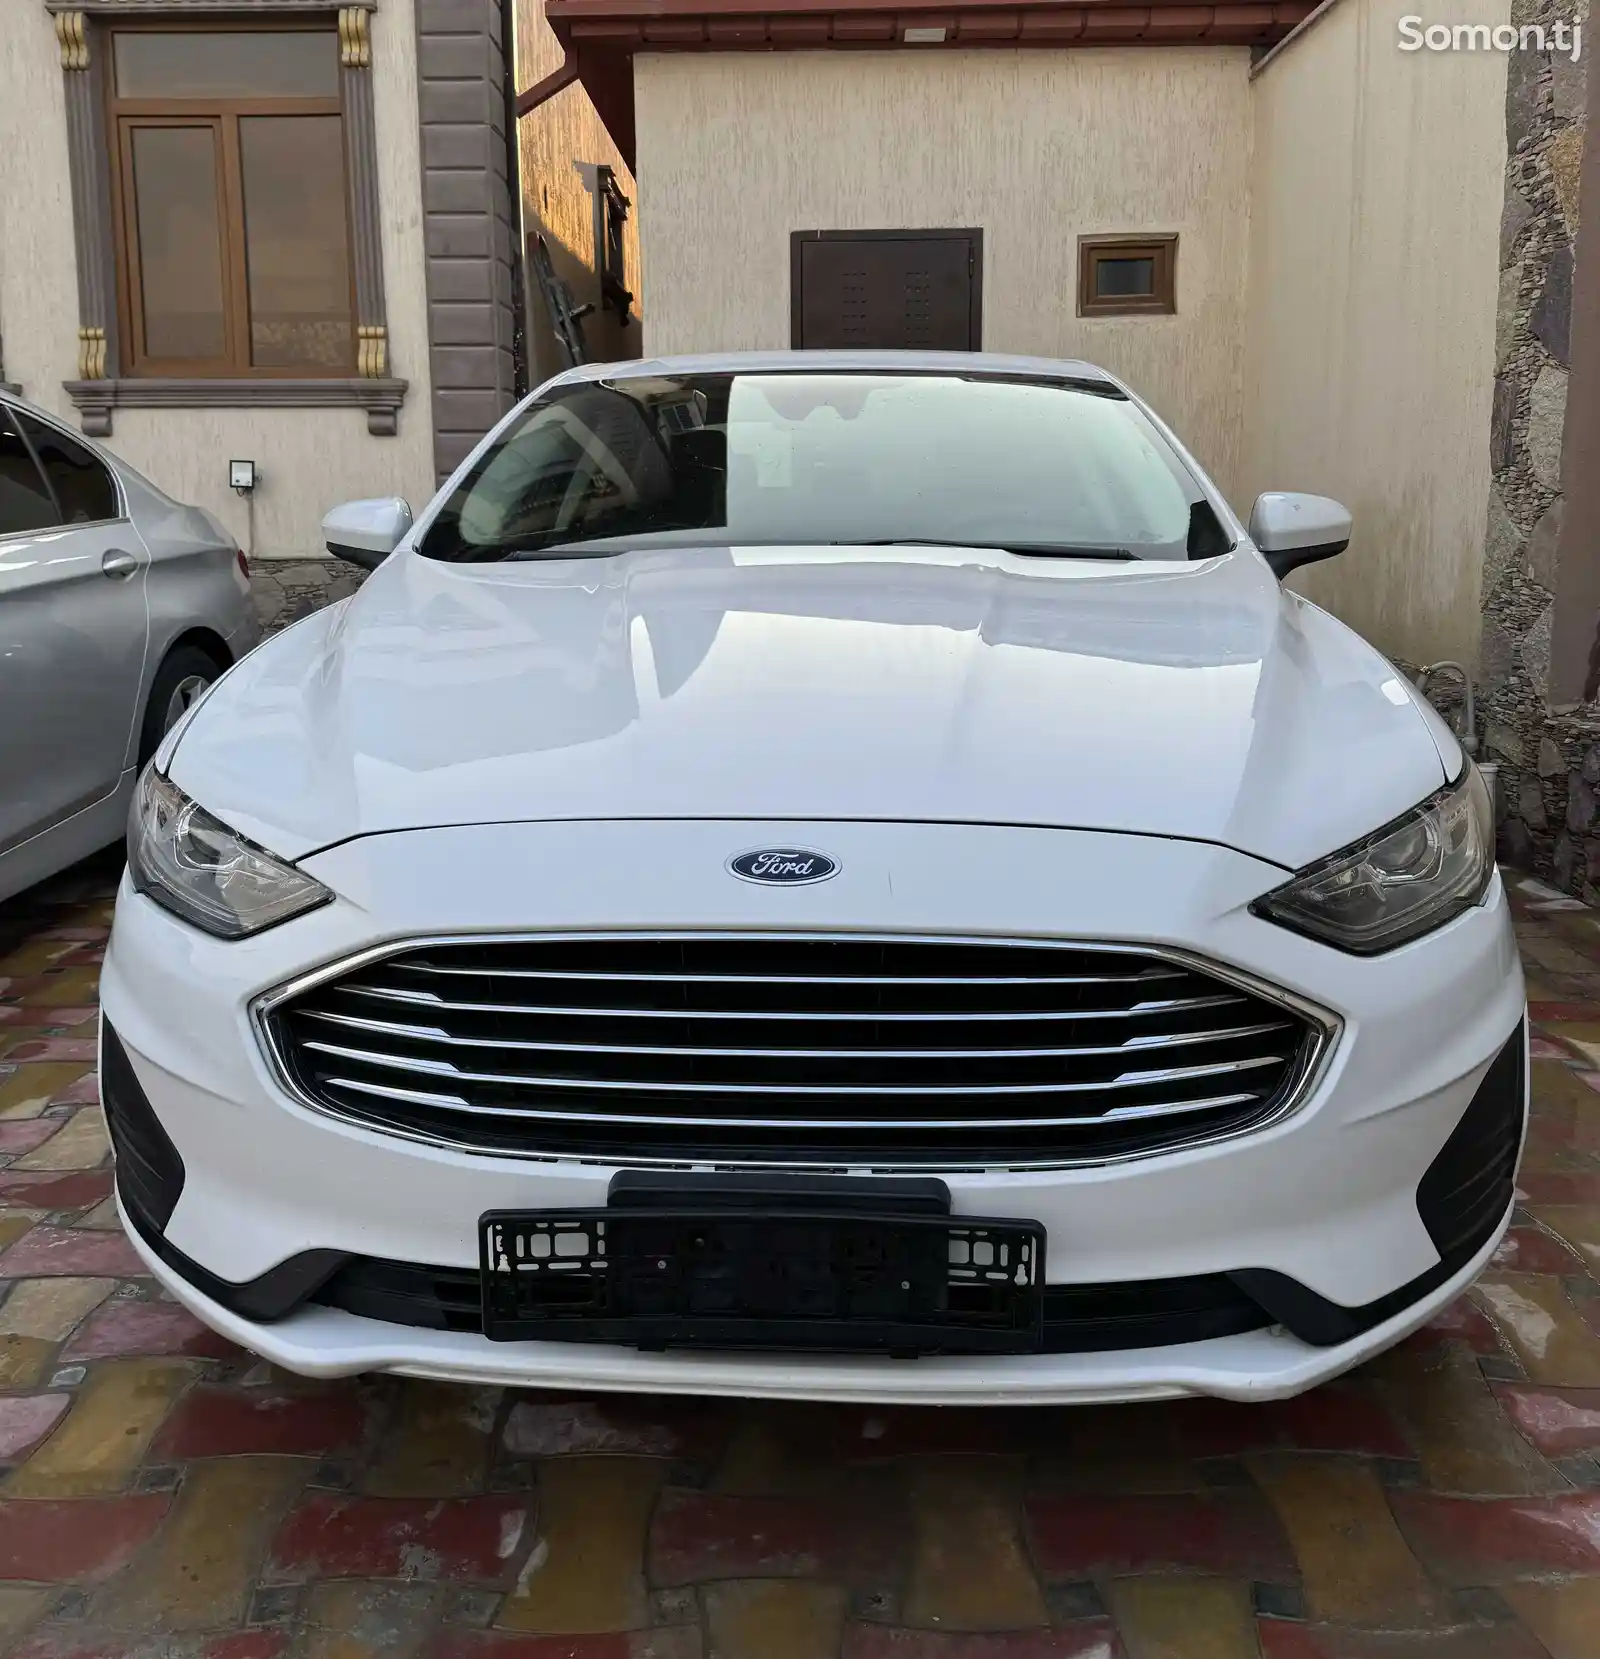 Ford Fusion, 2019-2